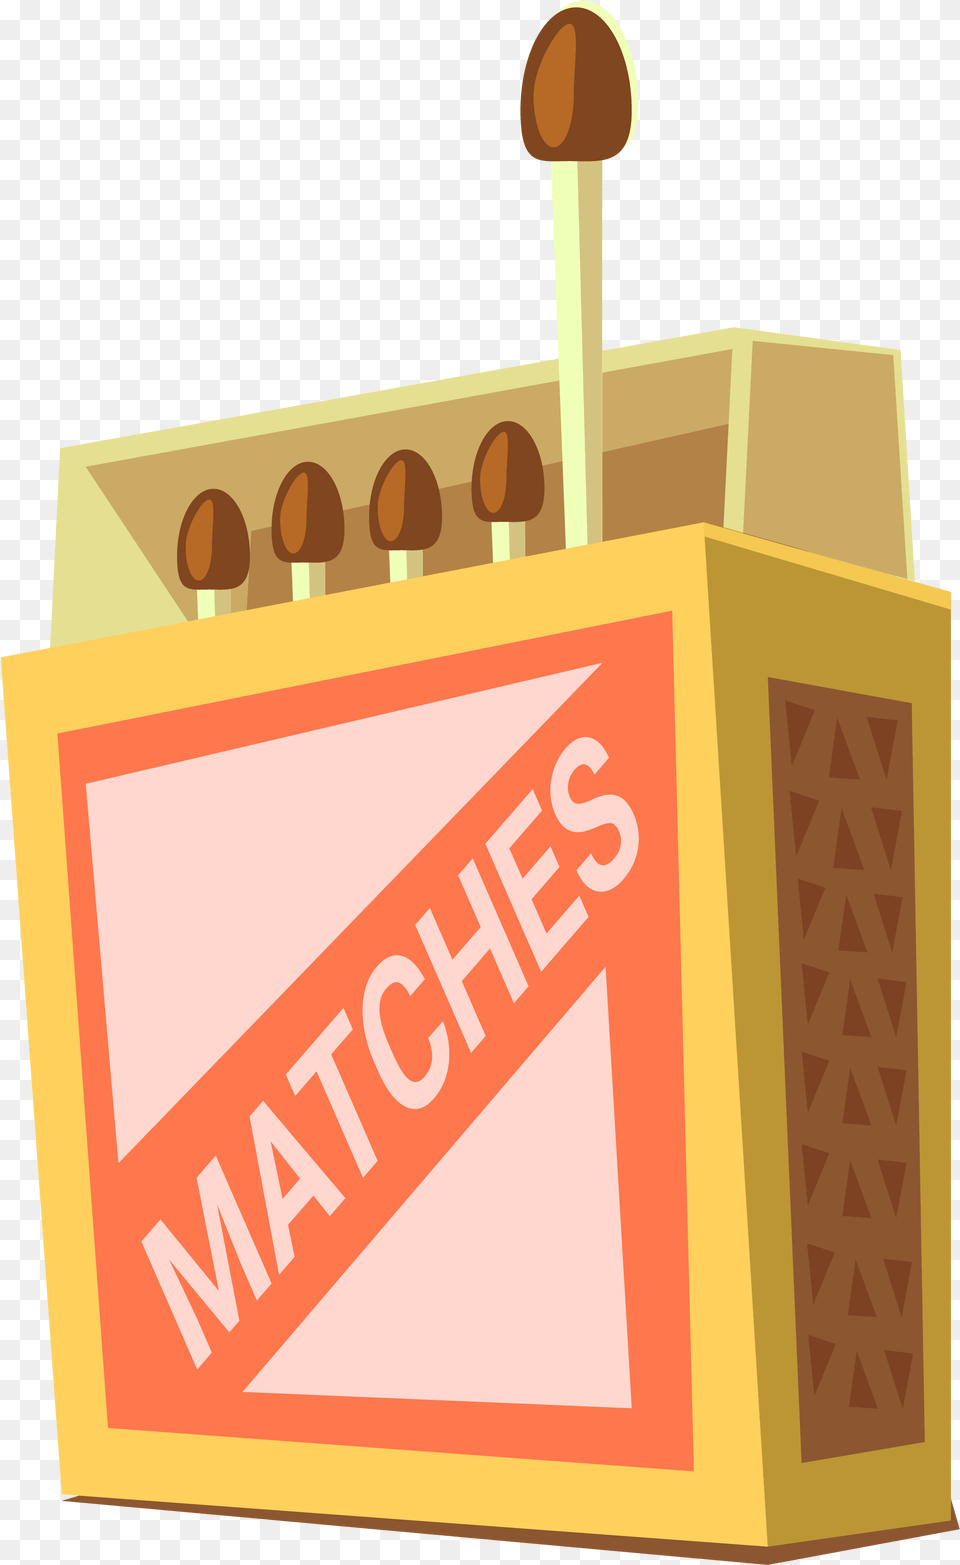 Matches Picture Box Of Matches Cartoon Free Transparent Png